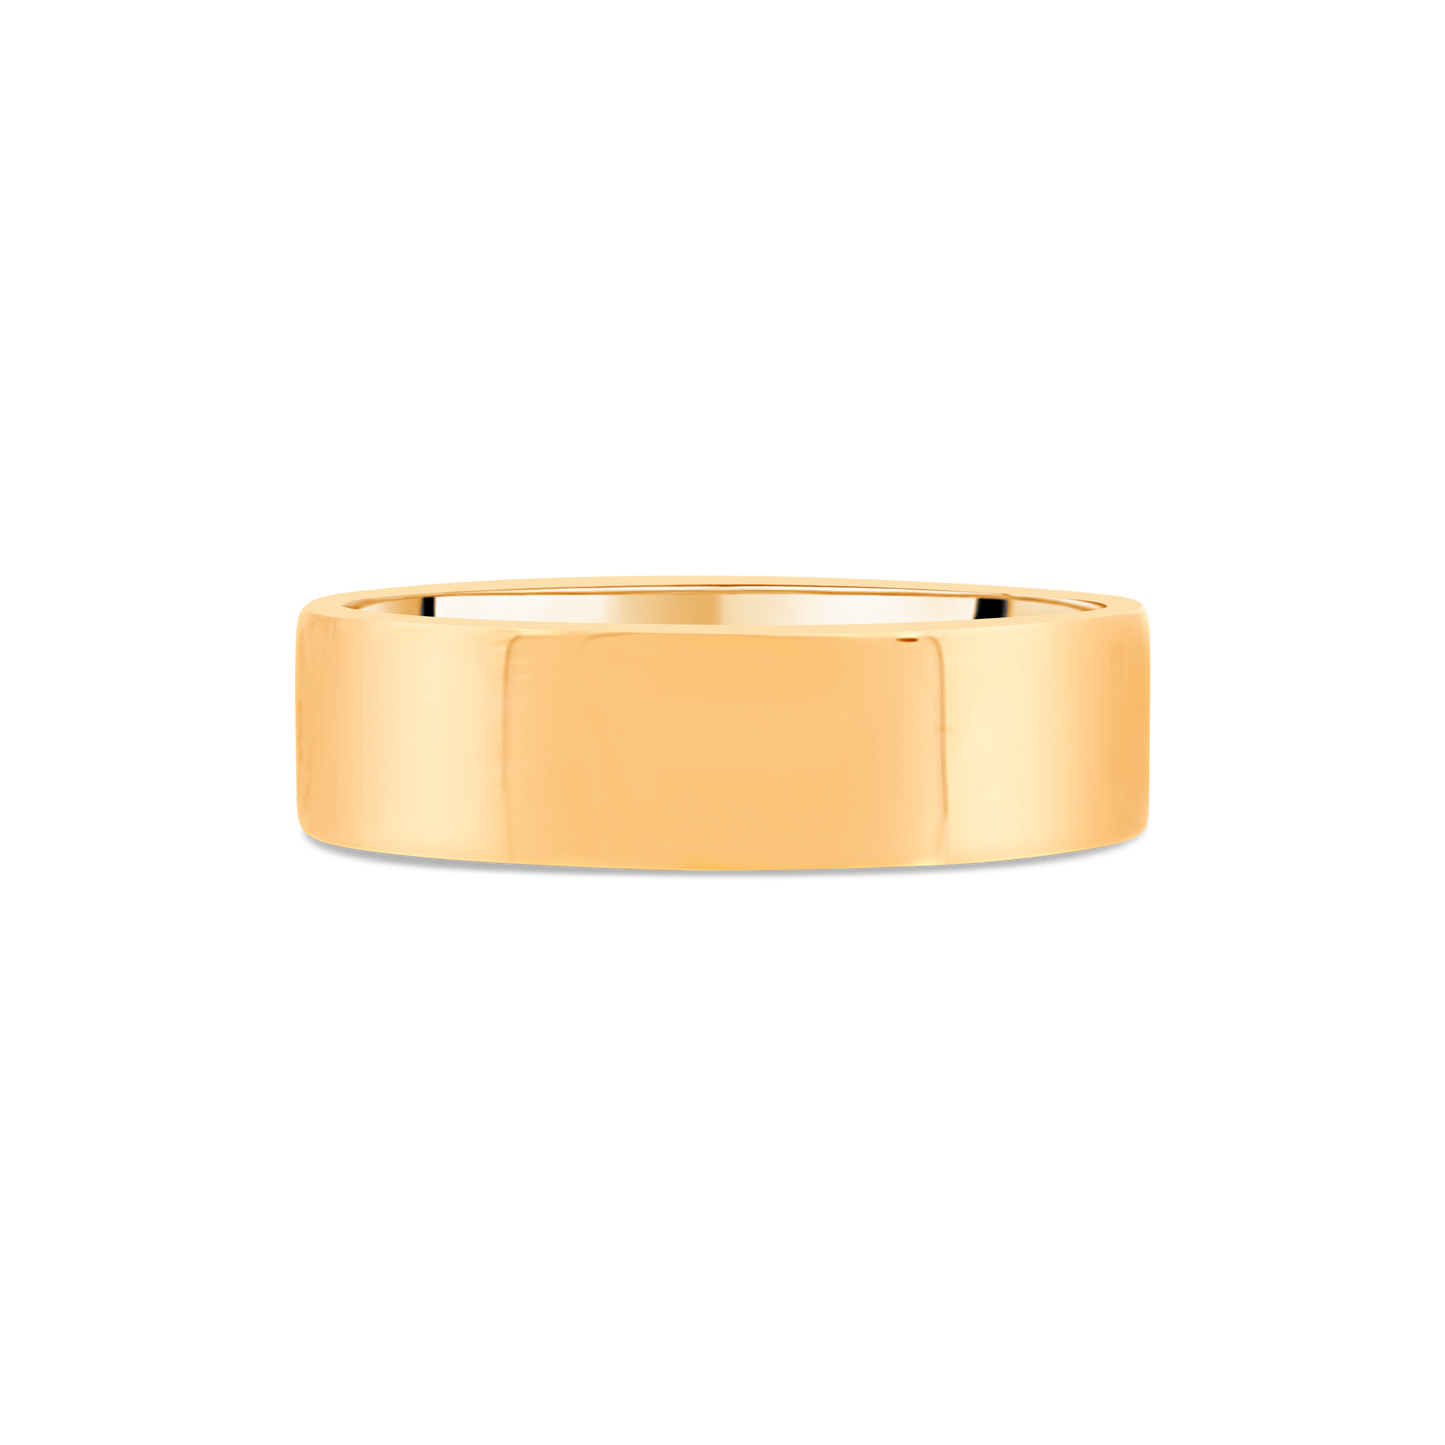 "Blush" Rose Gold 6mm Contemporary Comfort Fit Gents Wedding Band